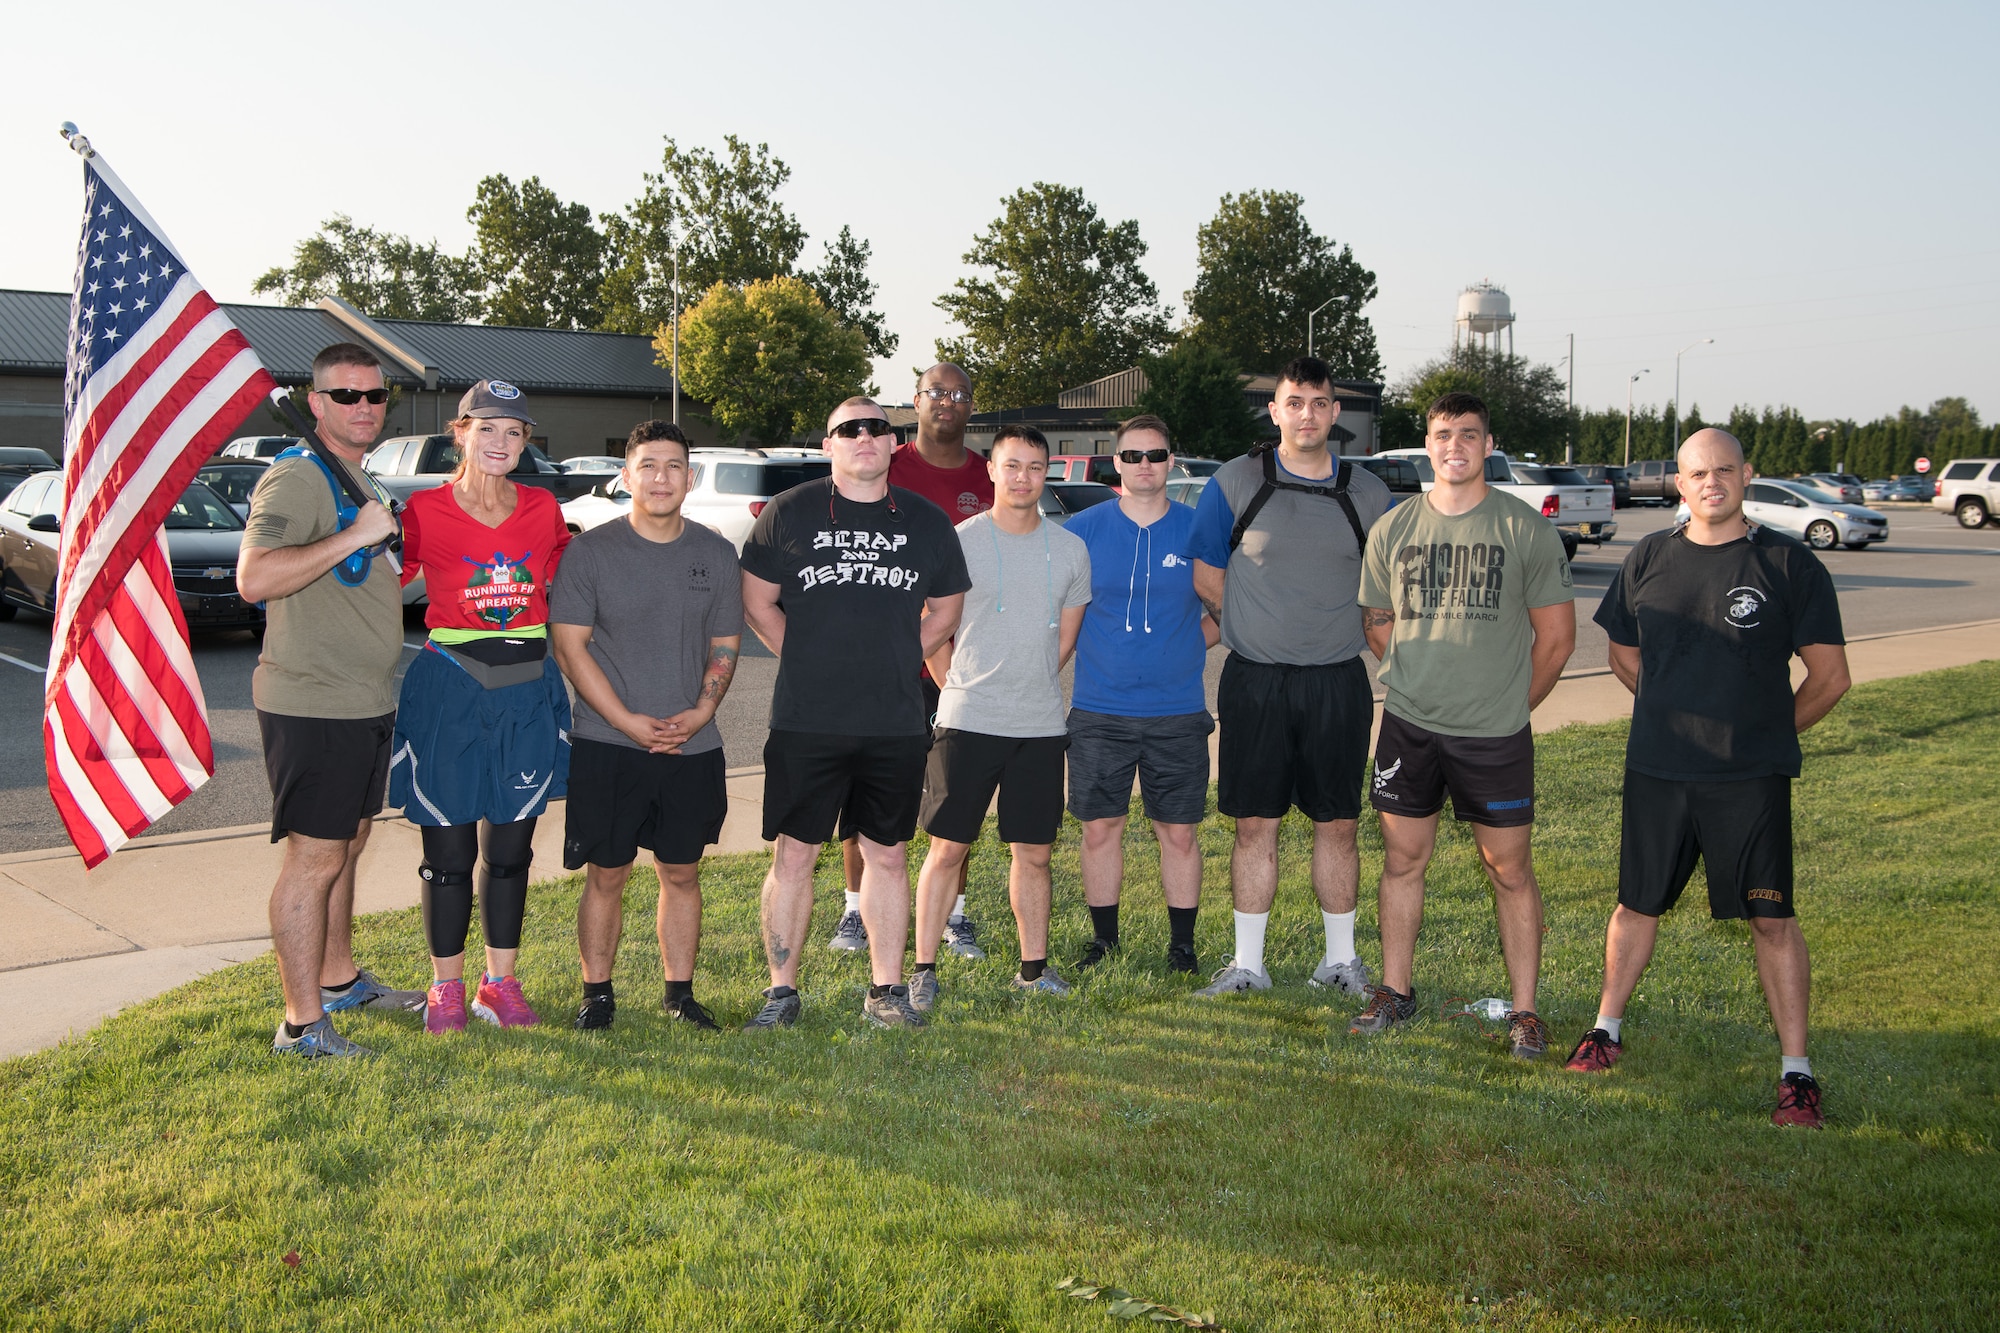 Master Sgt. Trevor Derr, 736th Aircraft Maintenance Squadron C-17 production superintendent (far left), and Cathy Powers, Gold Star Mother, stand with Airmen, Soldiers and Marines before the “Running Fir Wreaths” campaign Sept. 12, 2019, at Dover Air Force Base, Del. The group ran from Dover AFB to Legislative Hall in downtown Dover. (U.S. Air Force Photo by Mauricio Campino)